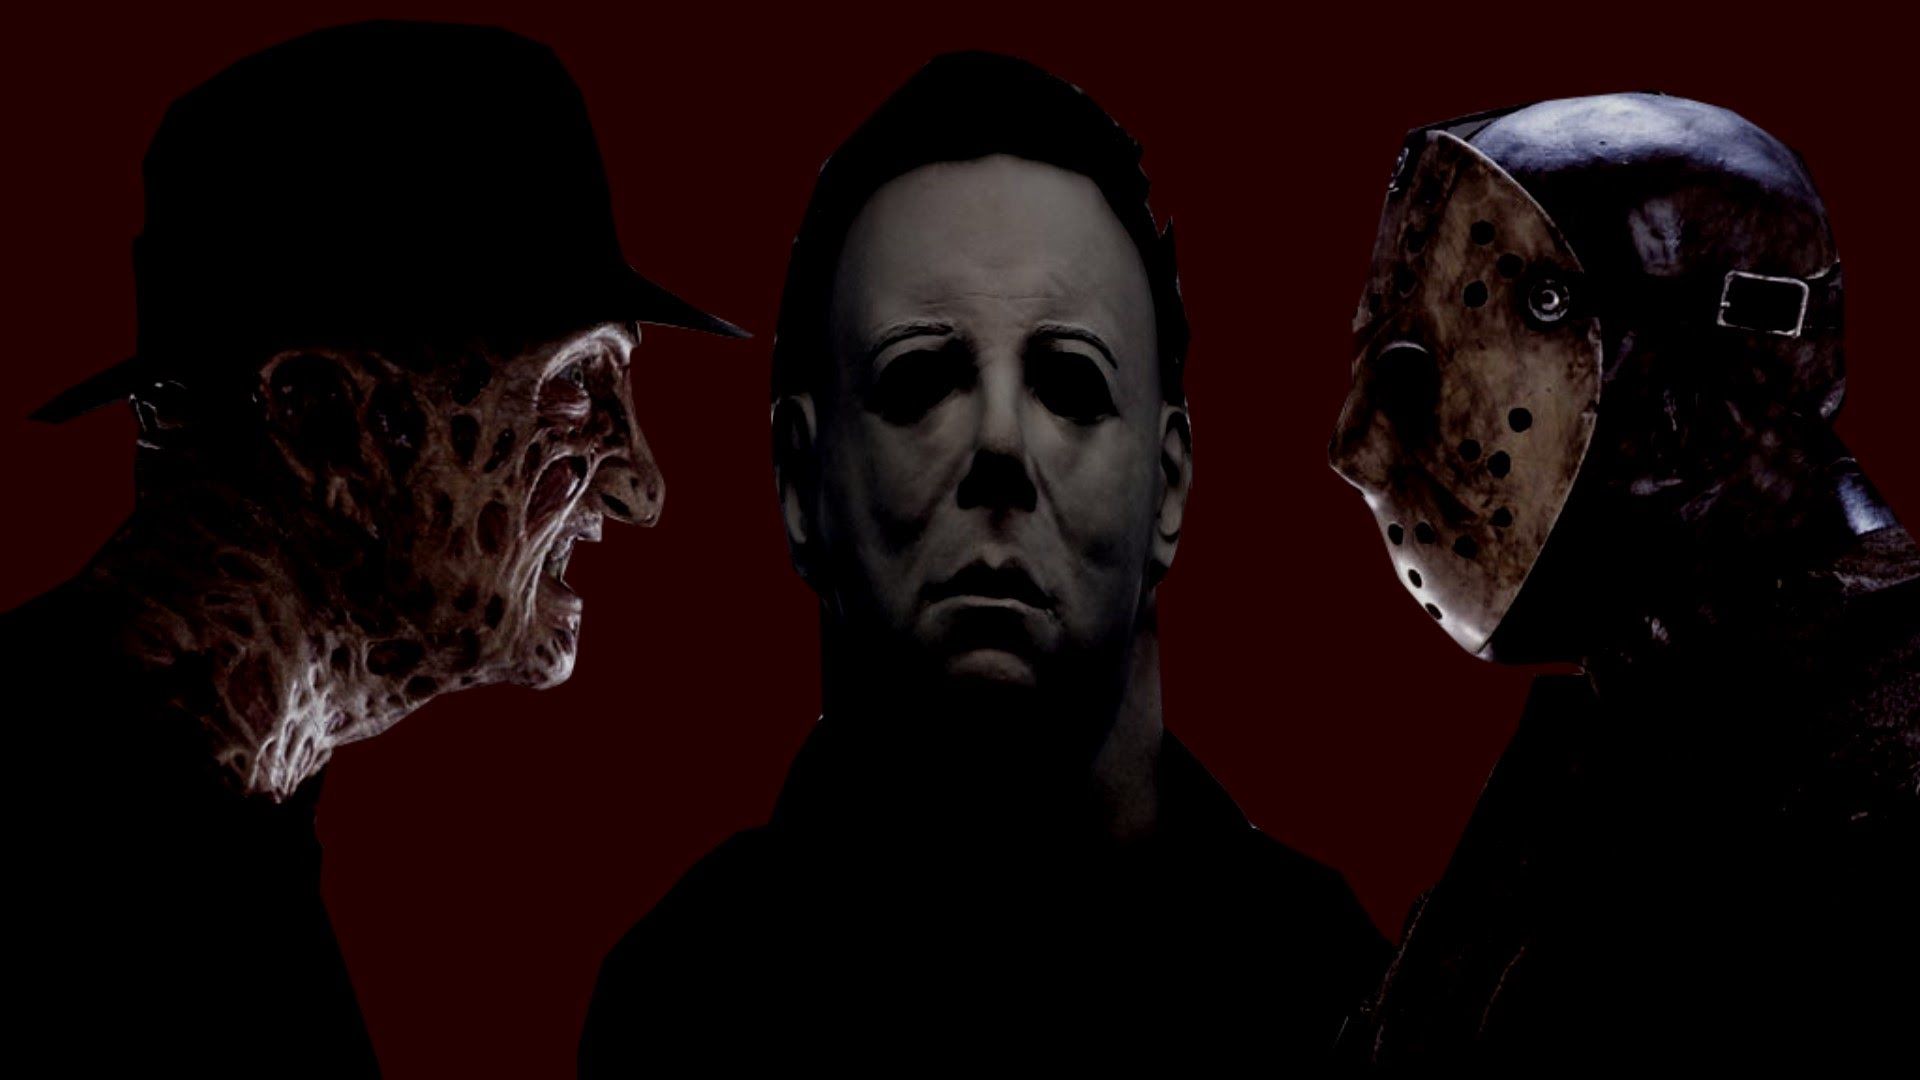 New Video Brings Your Favorite Horror Villains Into One Shared